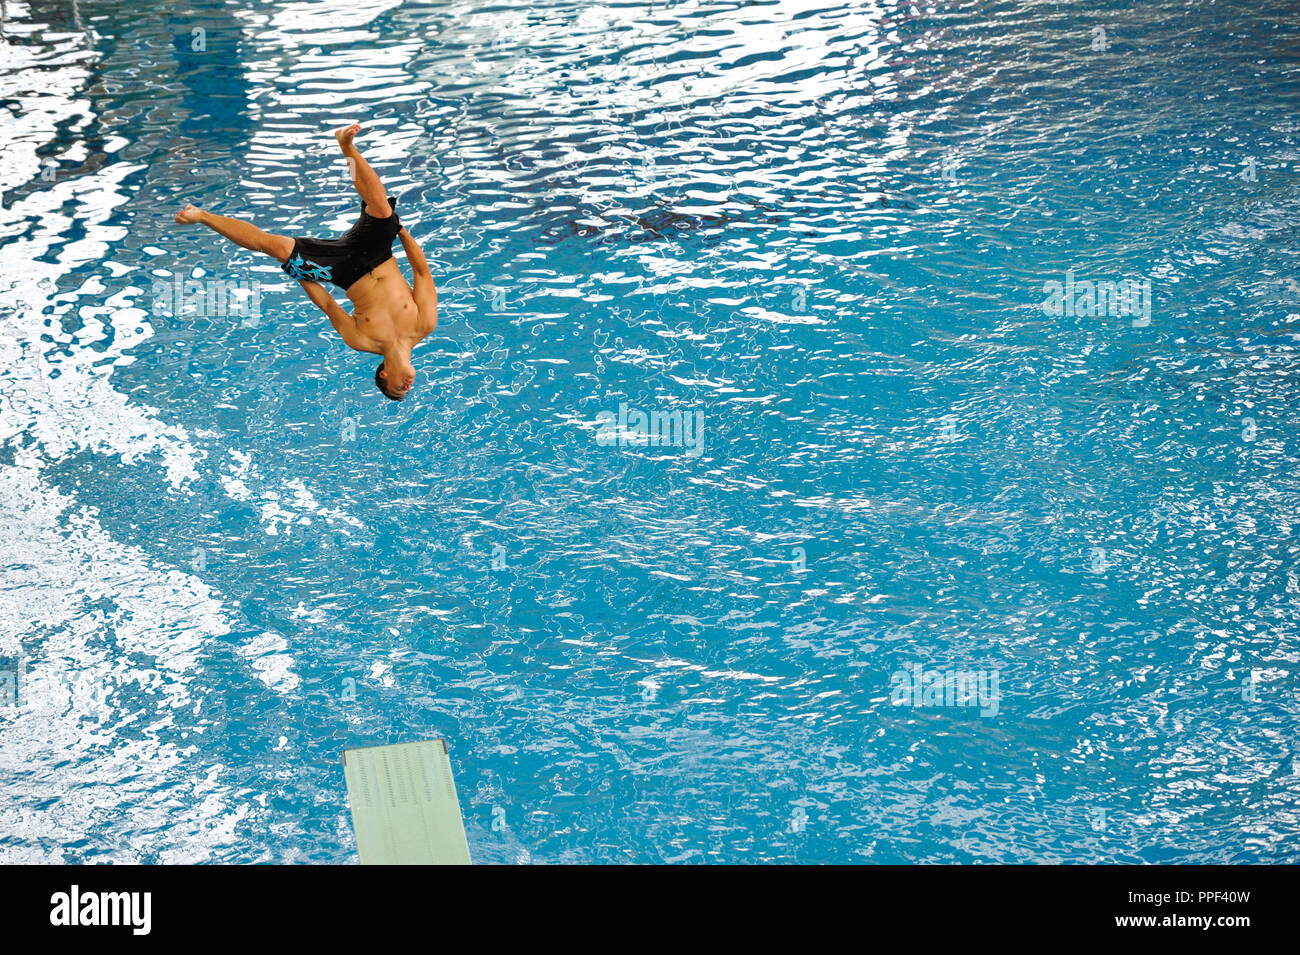 The Department of Sports of the City of Munich and the M-Baeder of Stadtwerke Muenchen organize for the first time the Munich Watersports Festival. In the picture, diver in the Olympic swimming pool. Stock Photo